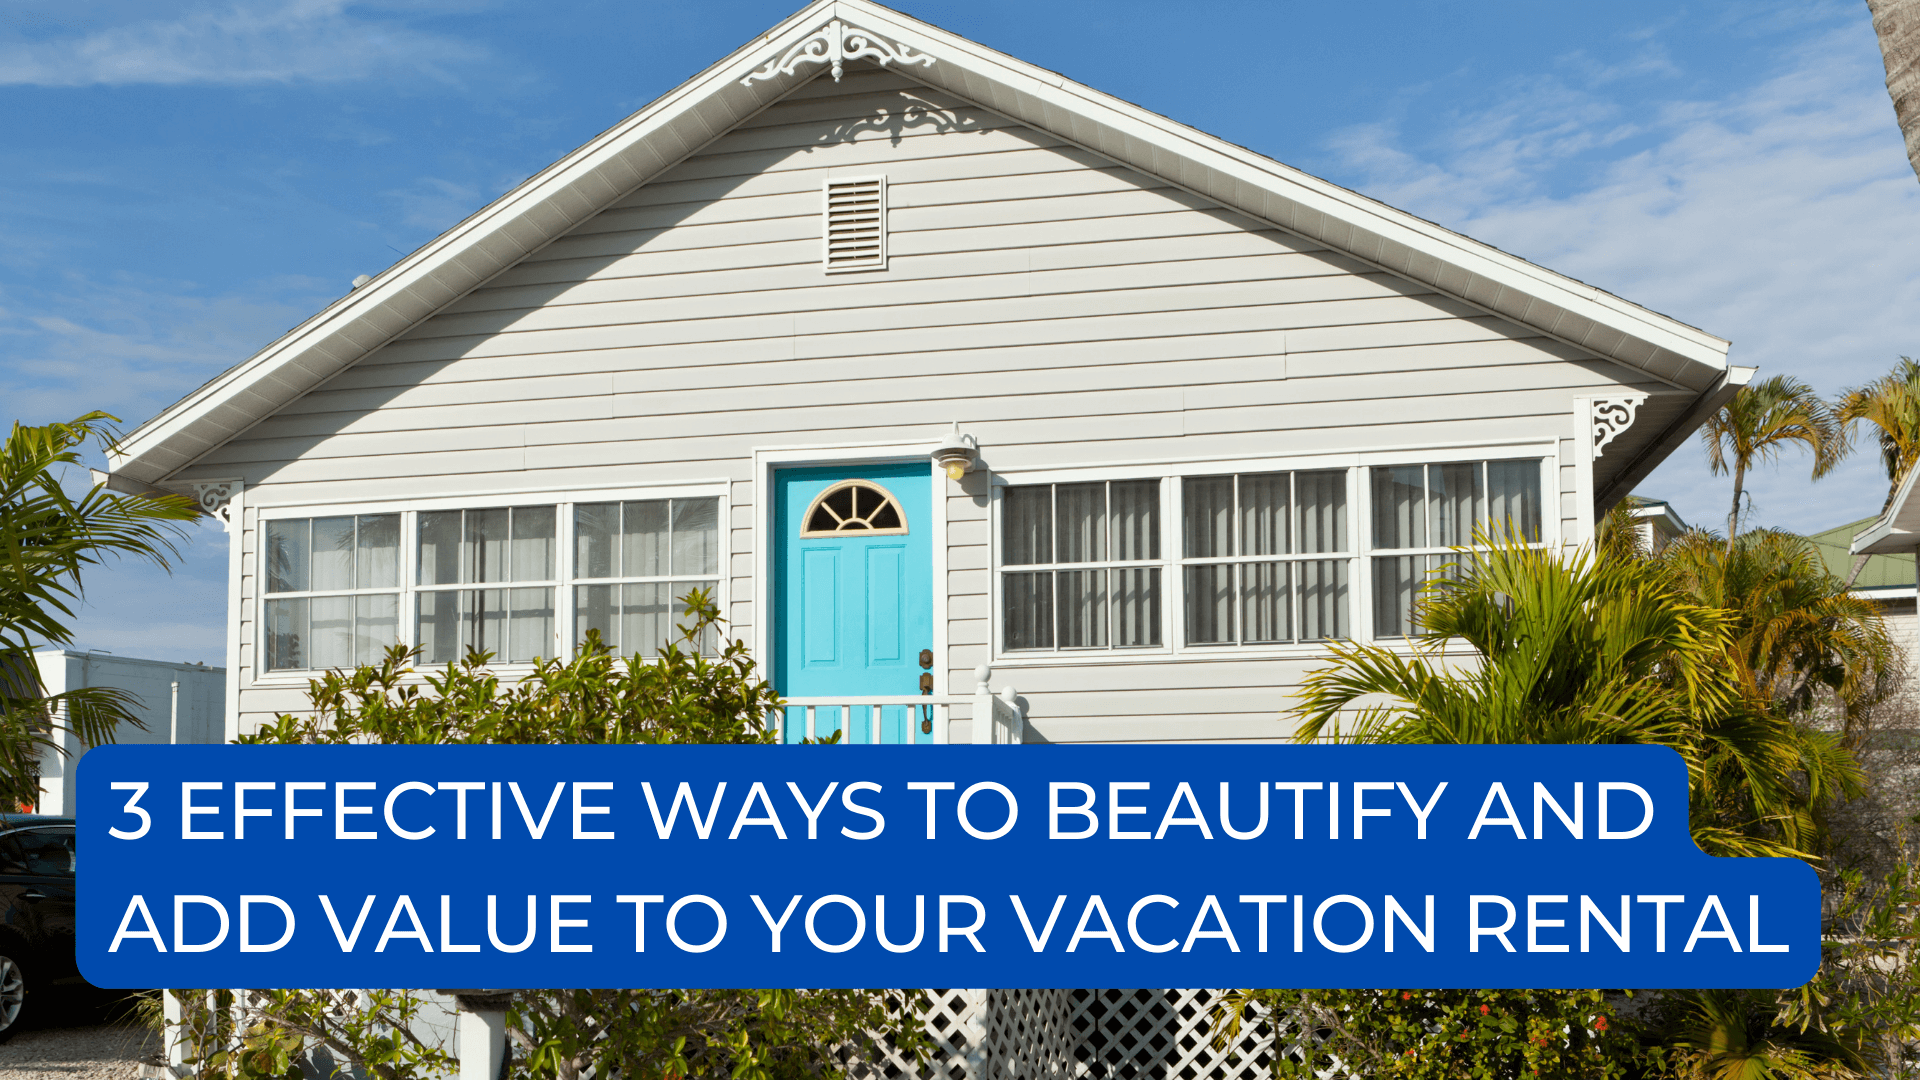 Beautify and Add Value to Vacation Rental